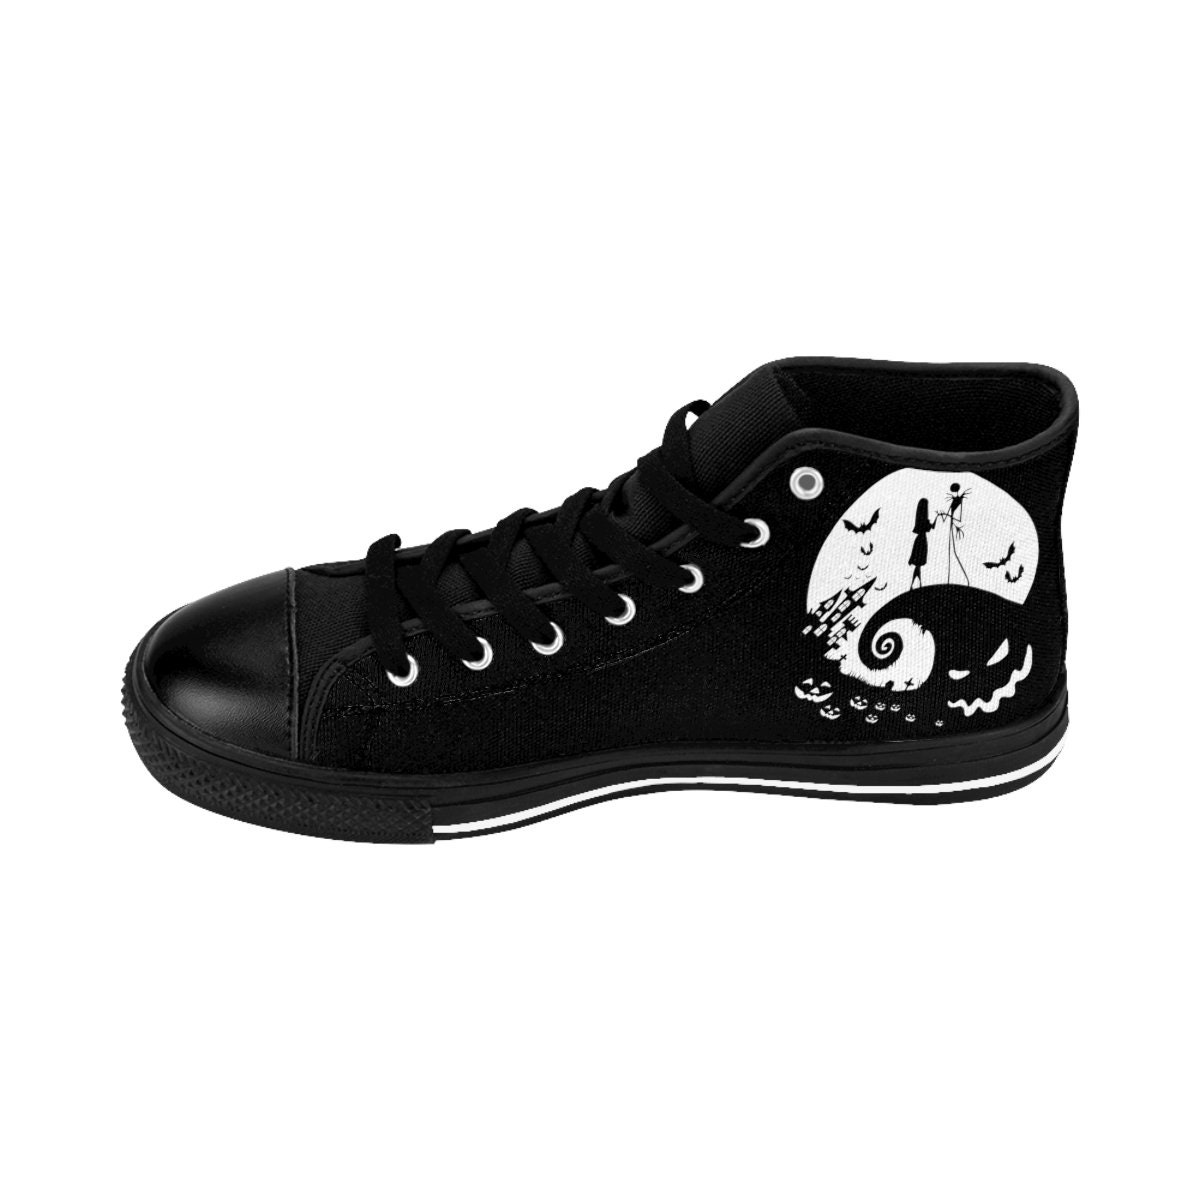 Discover Men's Nightmare Before Christmas Sneakers